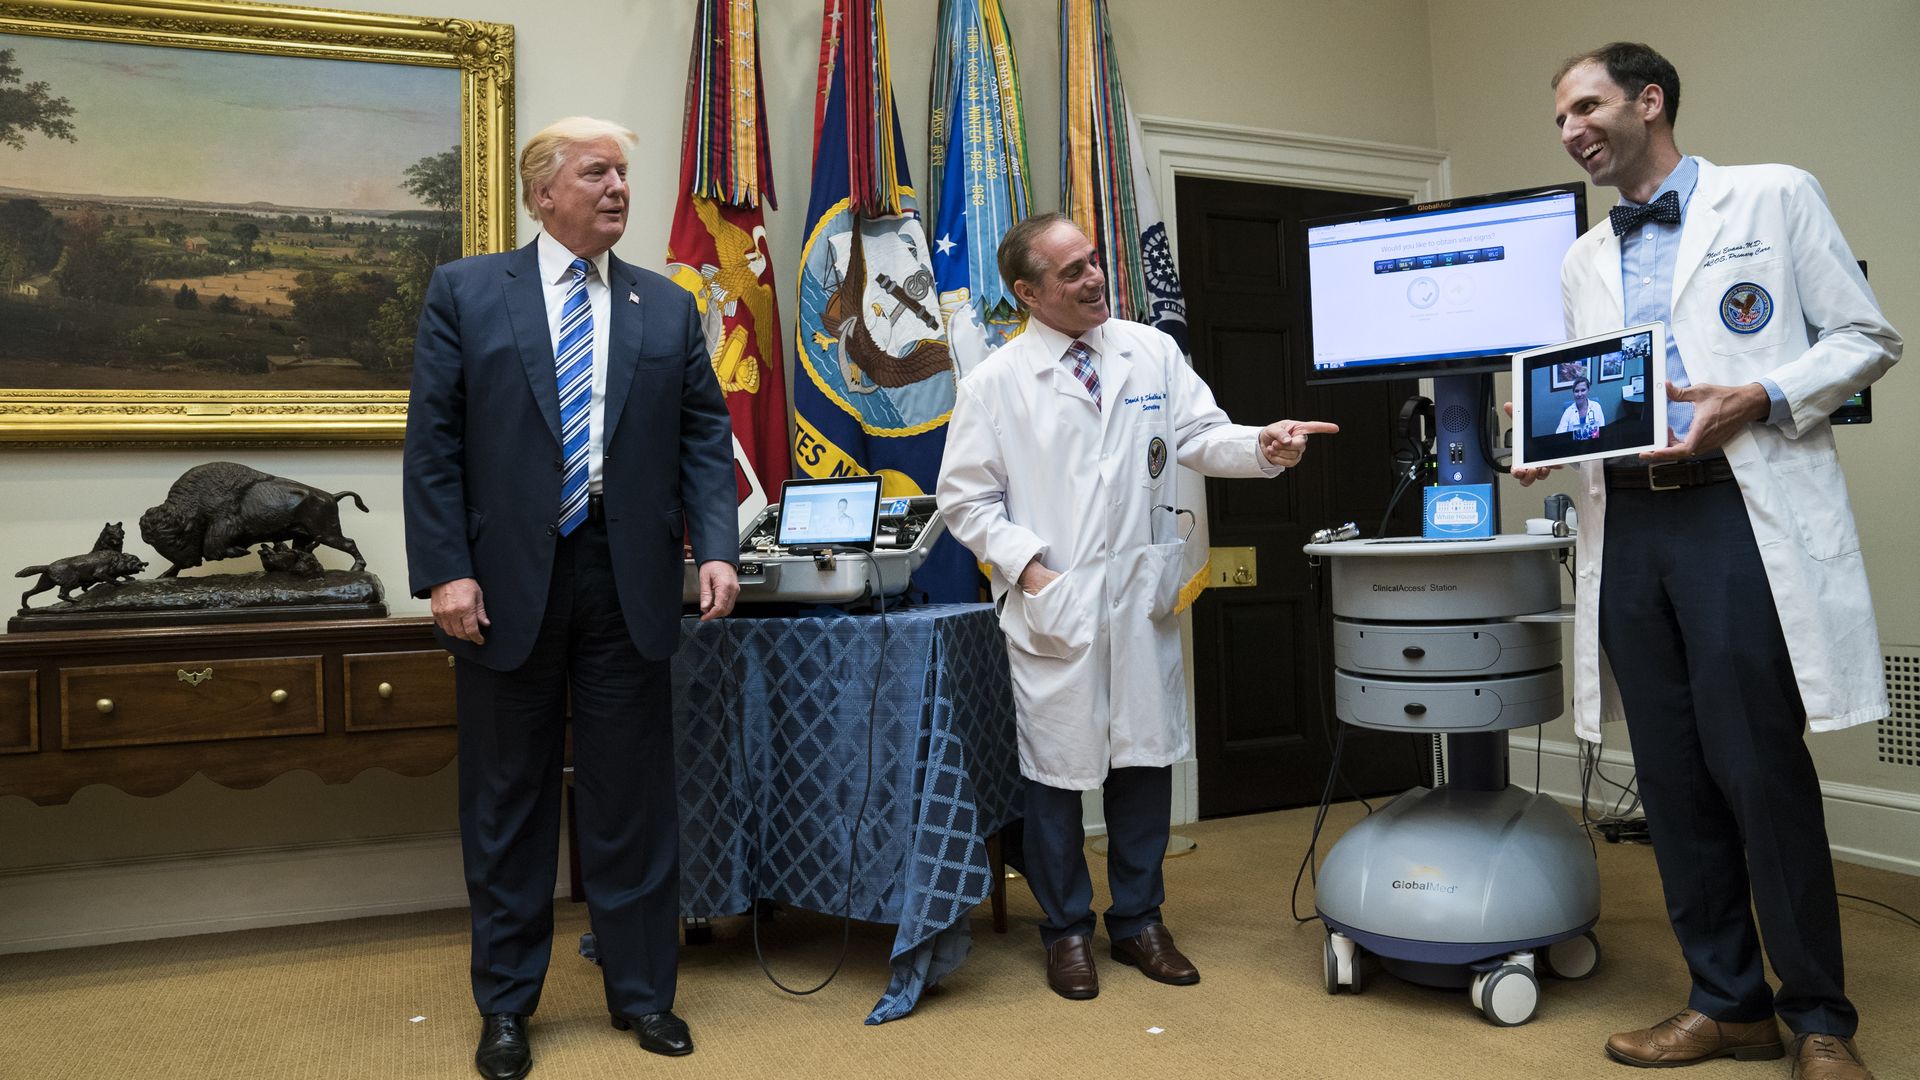 President Trump and doctors discussing telehealth benefits